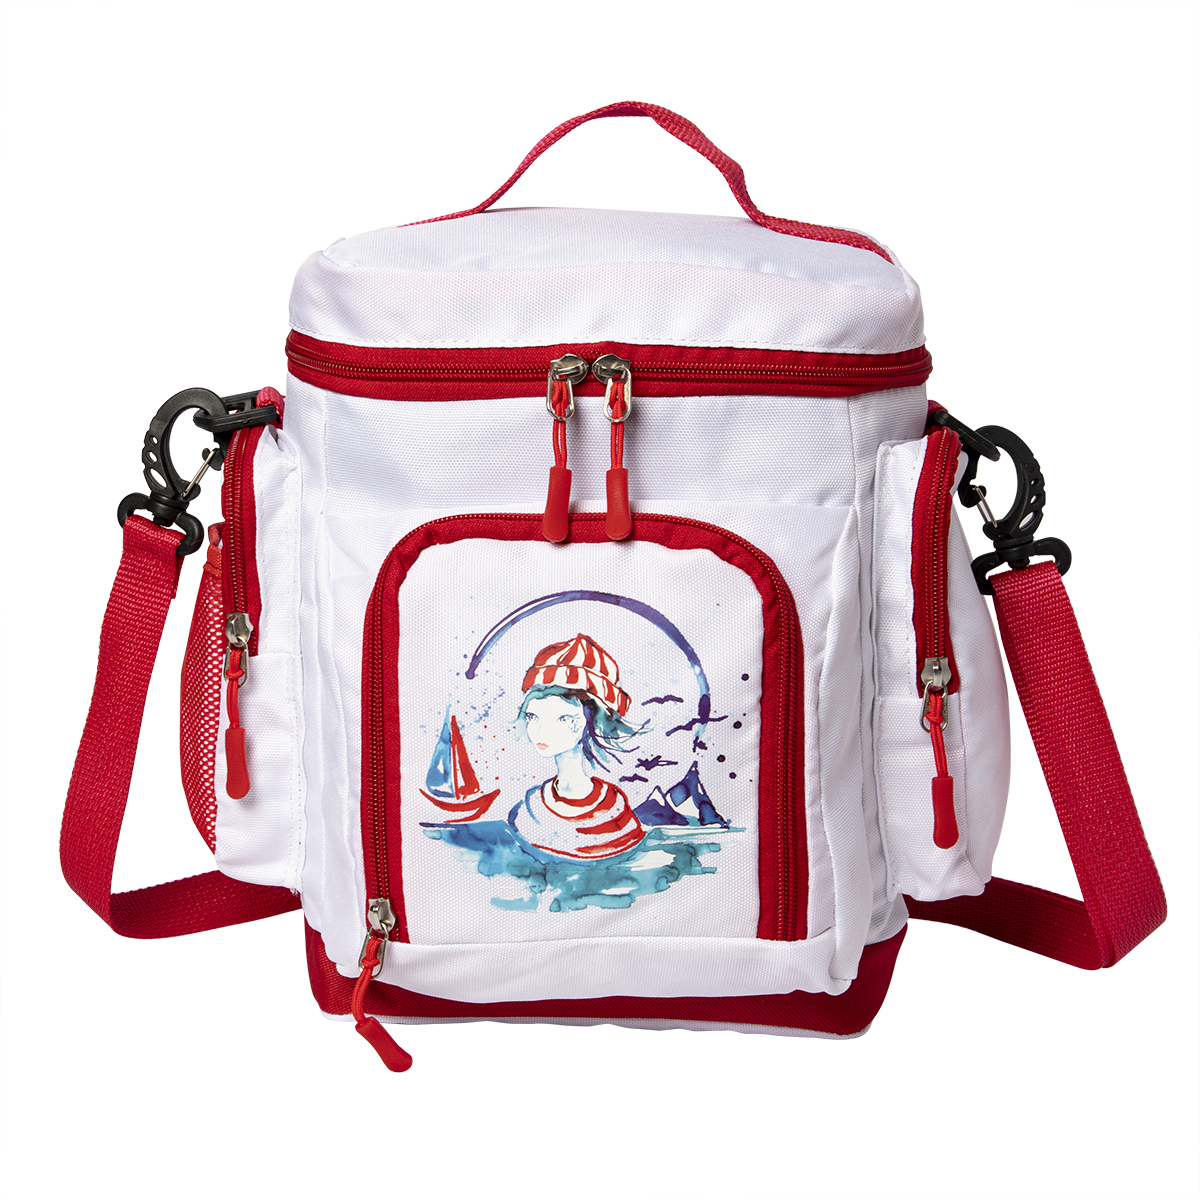 Anemoss sailor girl insulated lunch bag